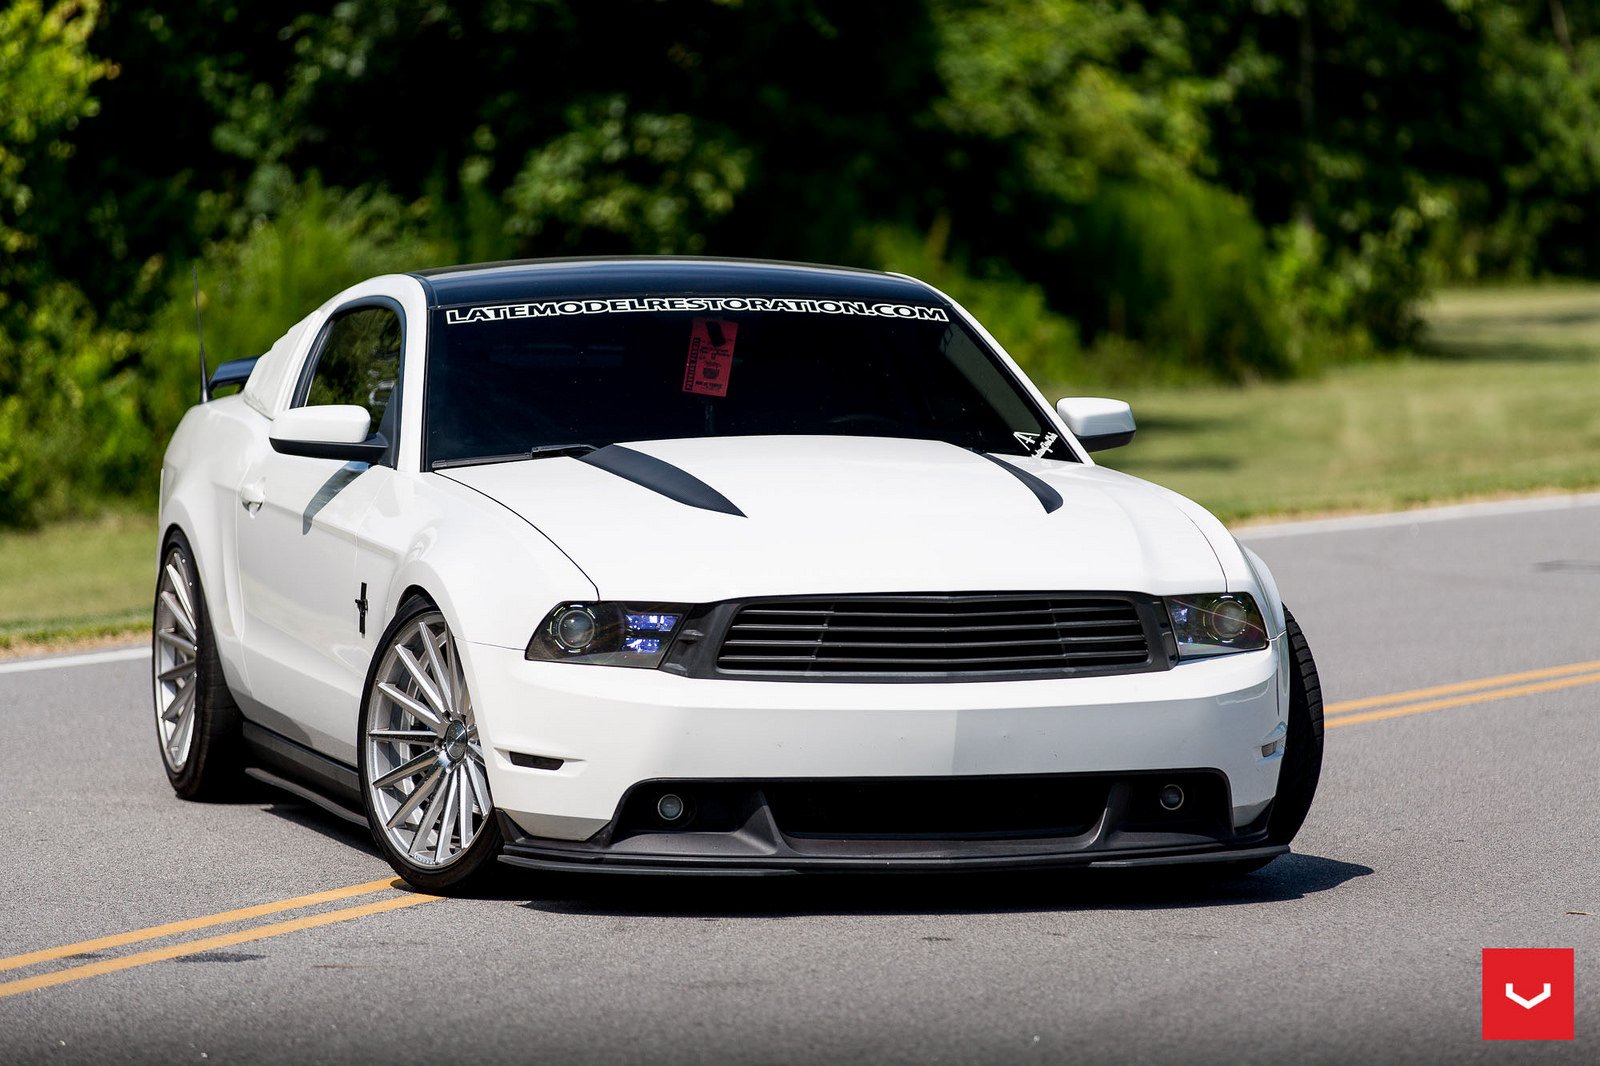 ford, Mustang, Coupe, Vossen, Wheels, Cars, Black Wallpaper